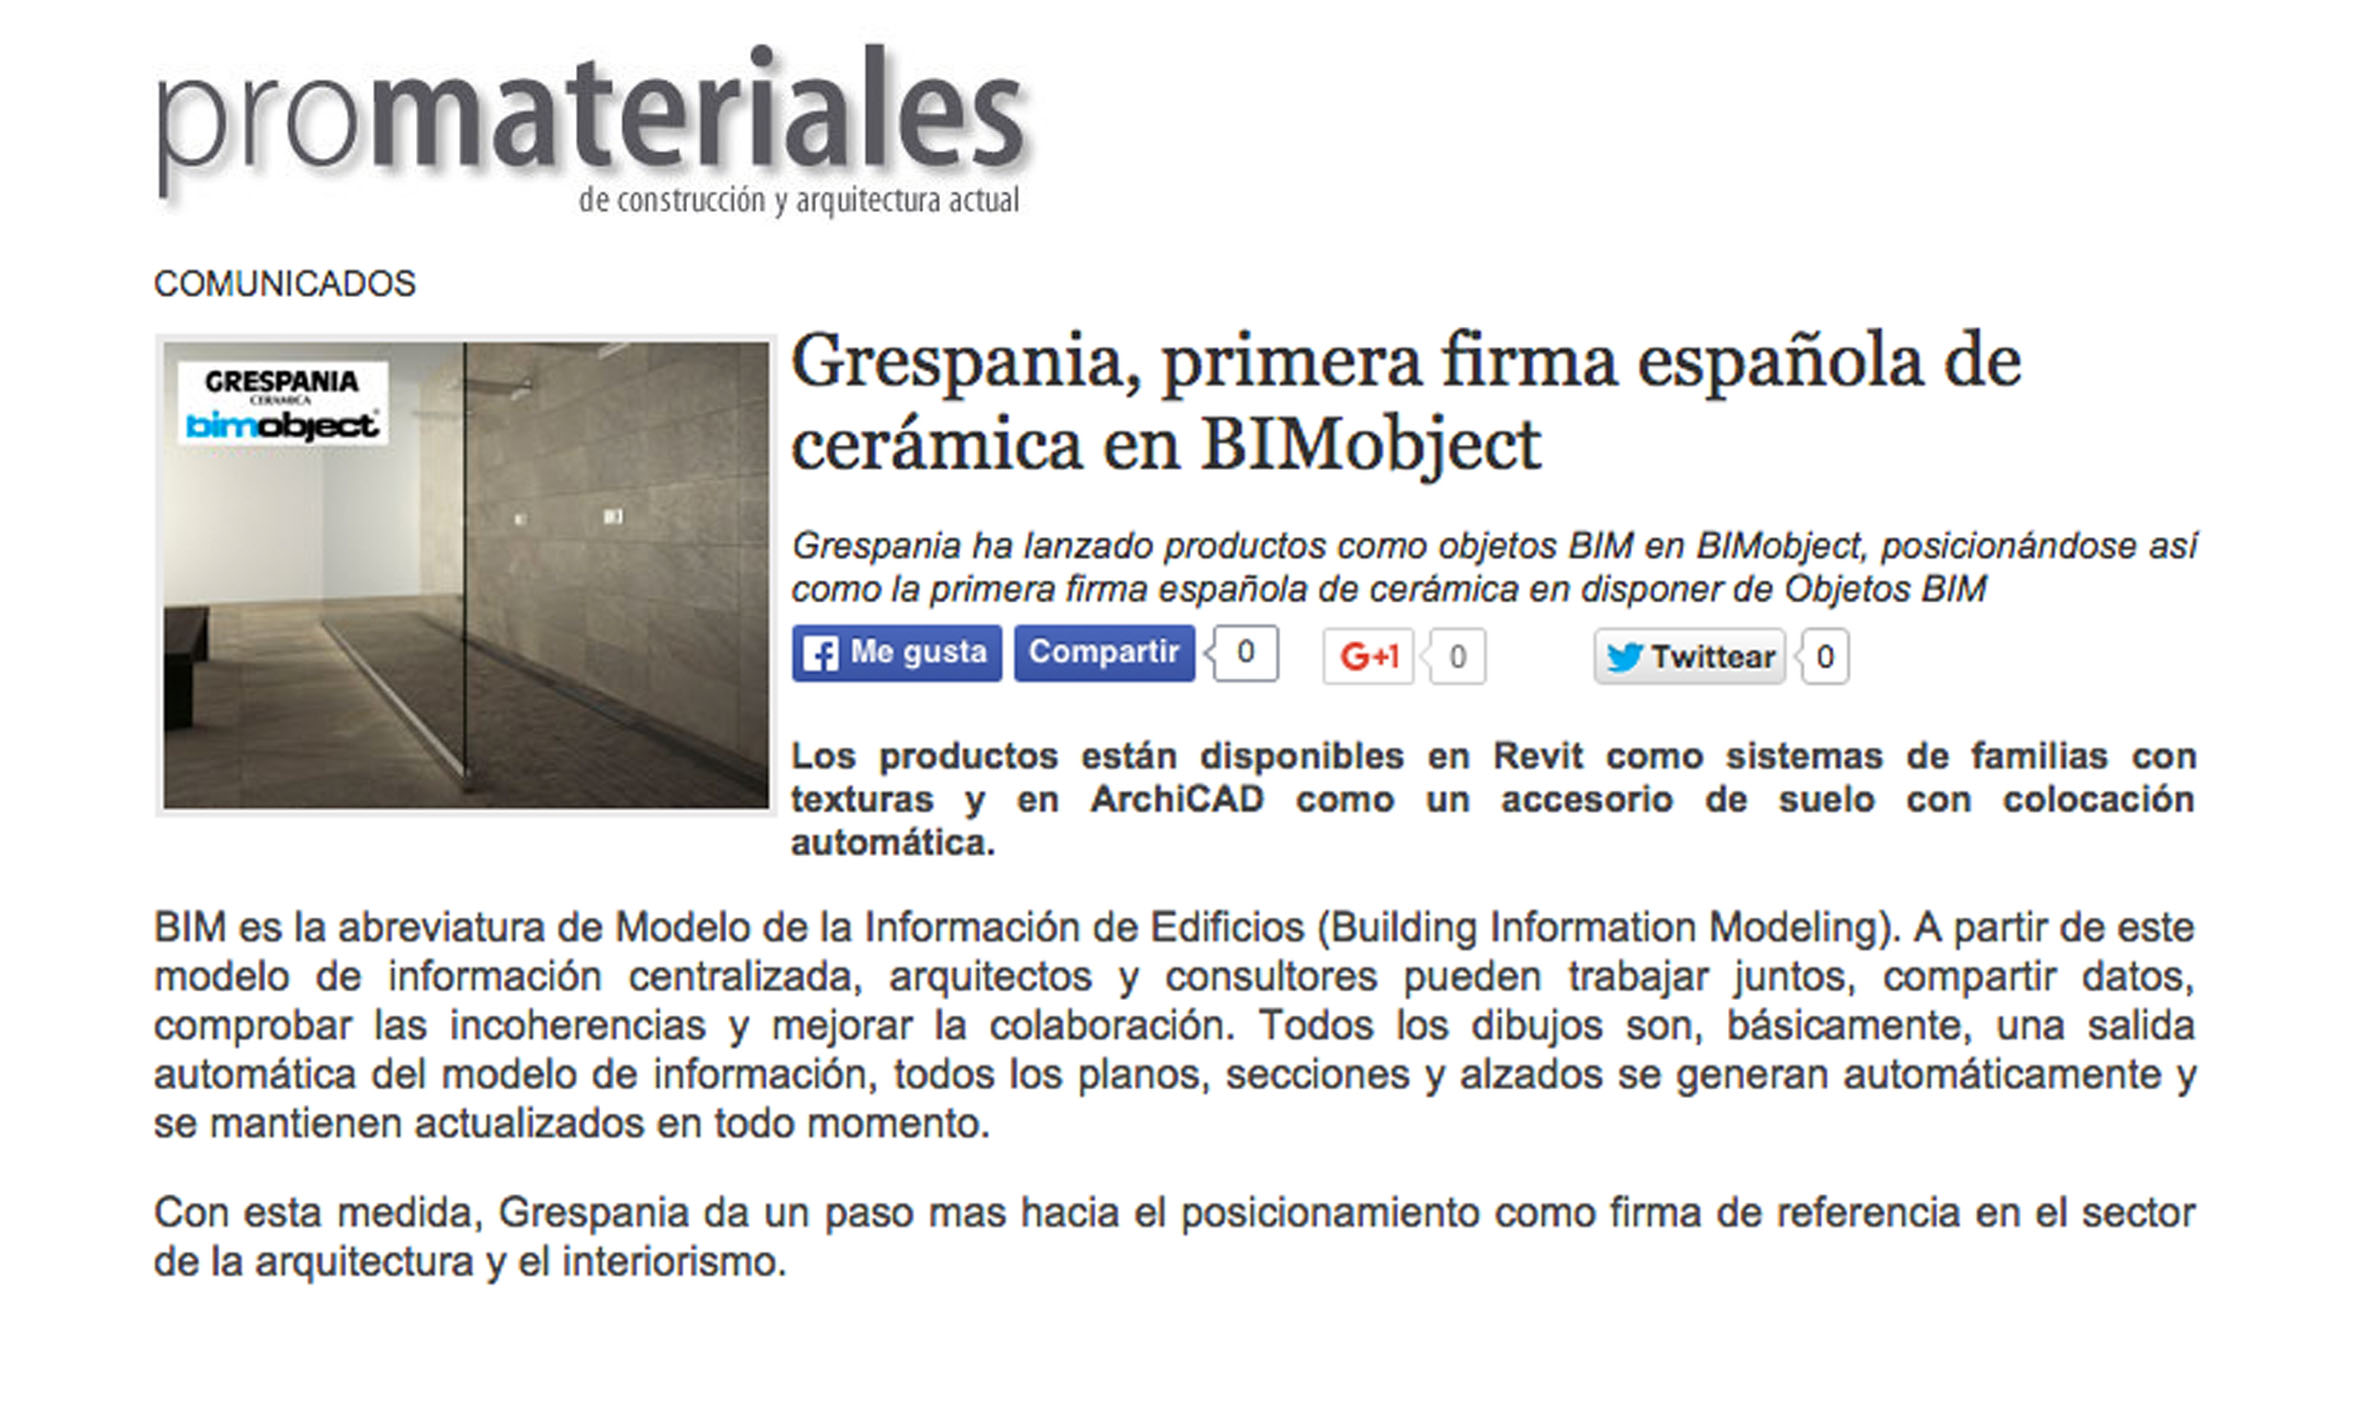 PROMATERIALES 18 Sept 2015 (WEB)